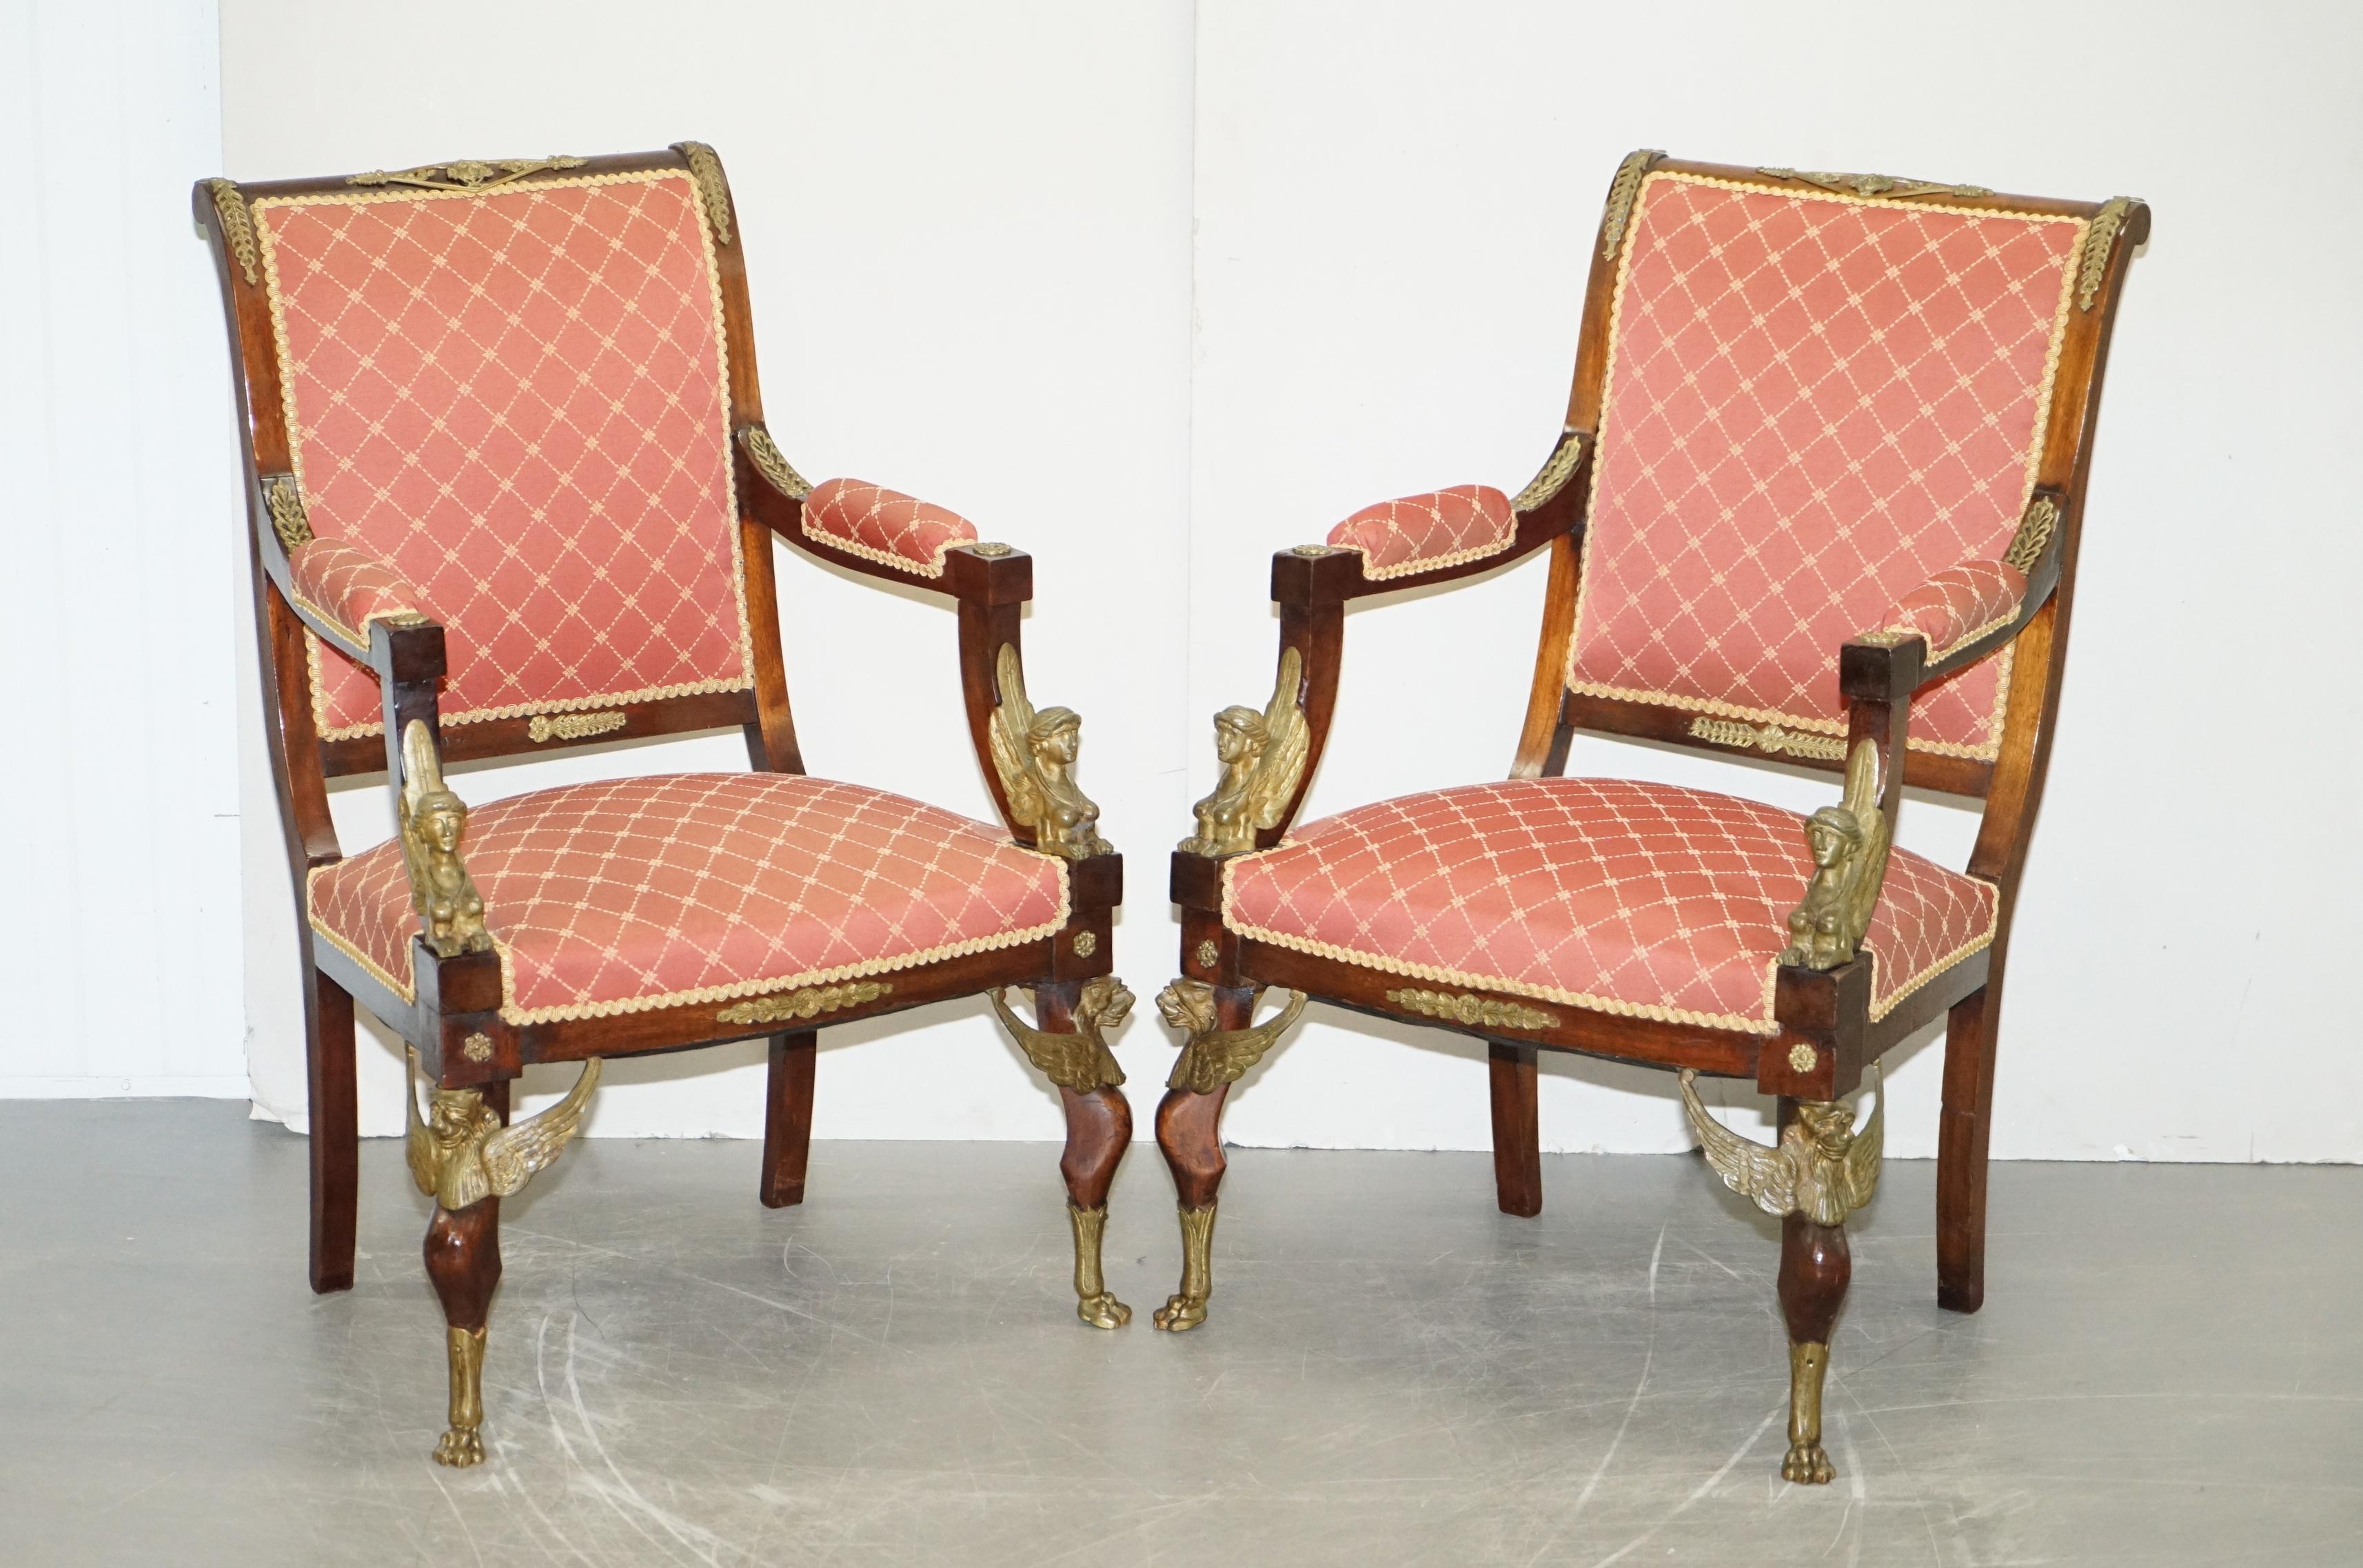 We are delighted to this very decorative collectable suite of mahogany with ornate Sphinx & Griffon ormolu mounted French Empire Egyptian revival salon seating

A very good looking and decorative suite. These are period mid 19th century examples